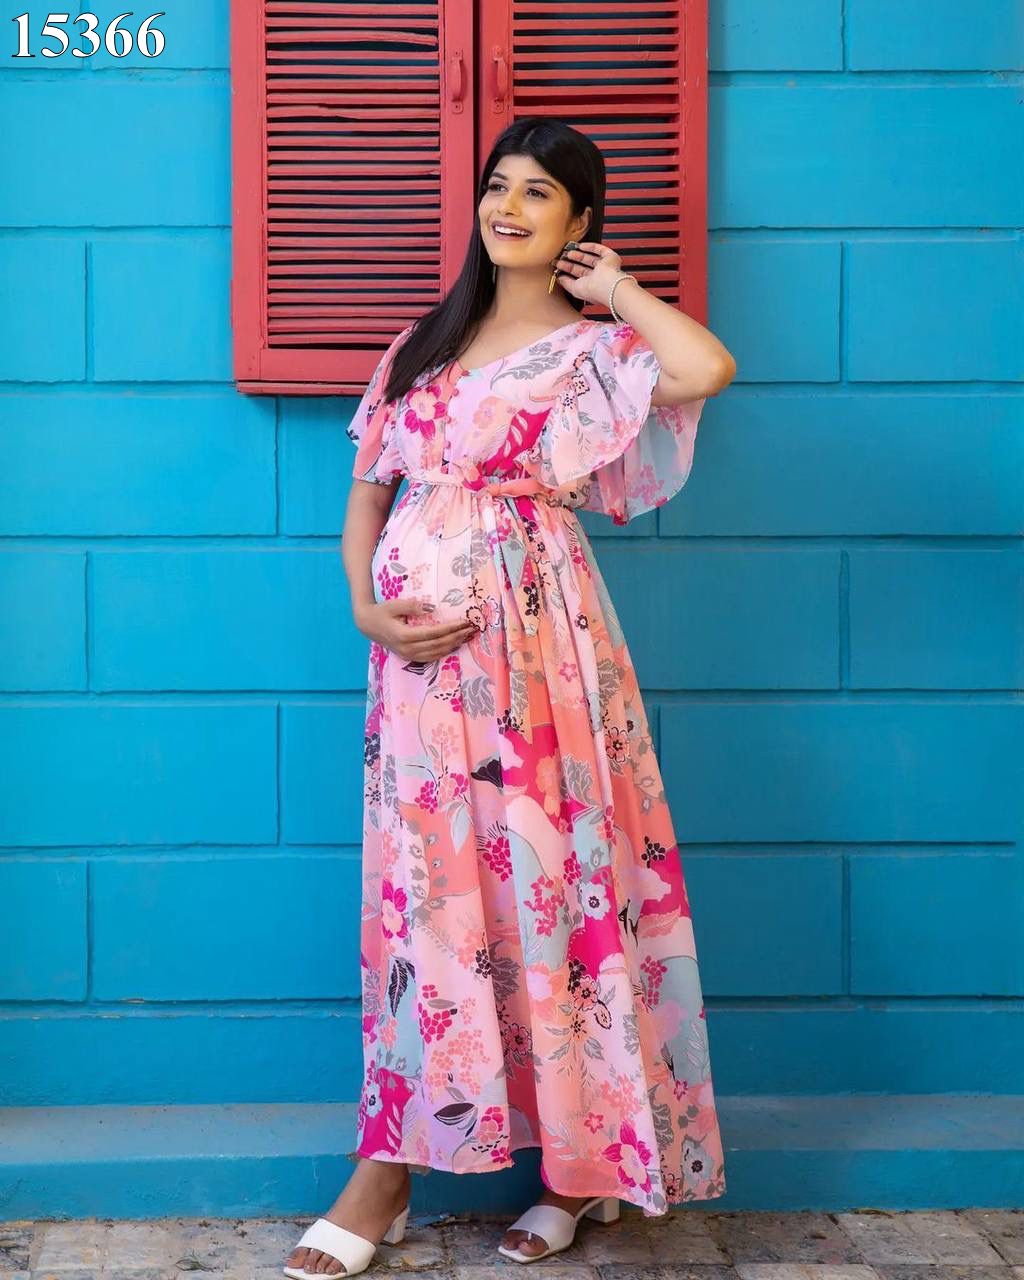 Pin by Ambreen Shahzad on Me n my style | Maternity fashion, Fashion, Teen  fashion outfits